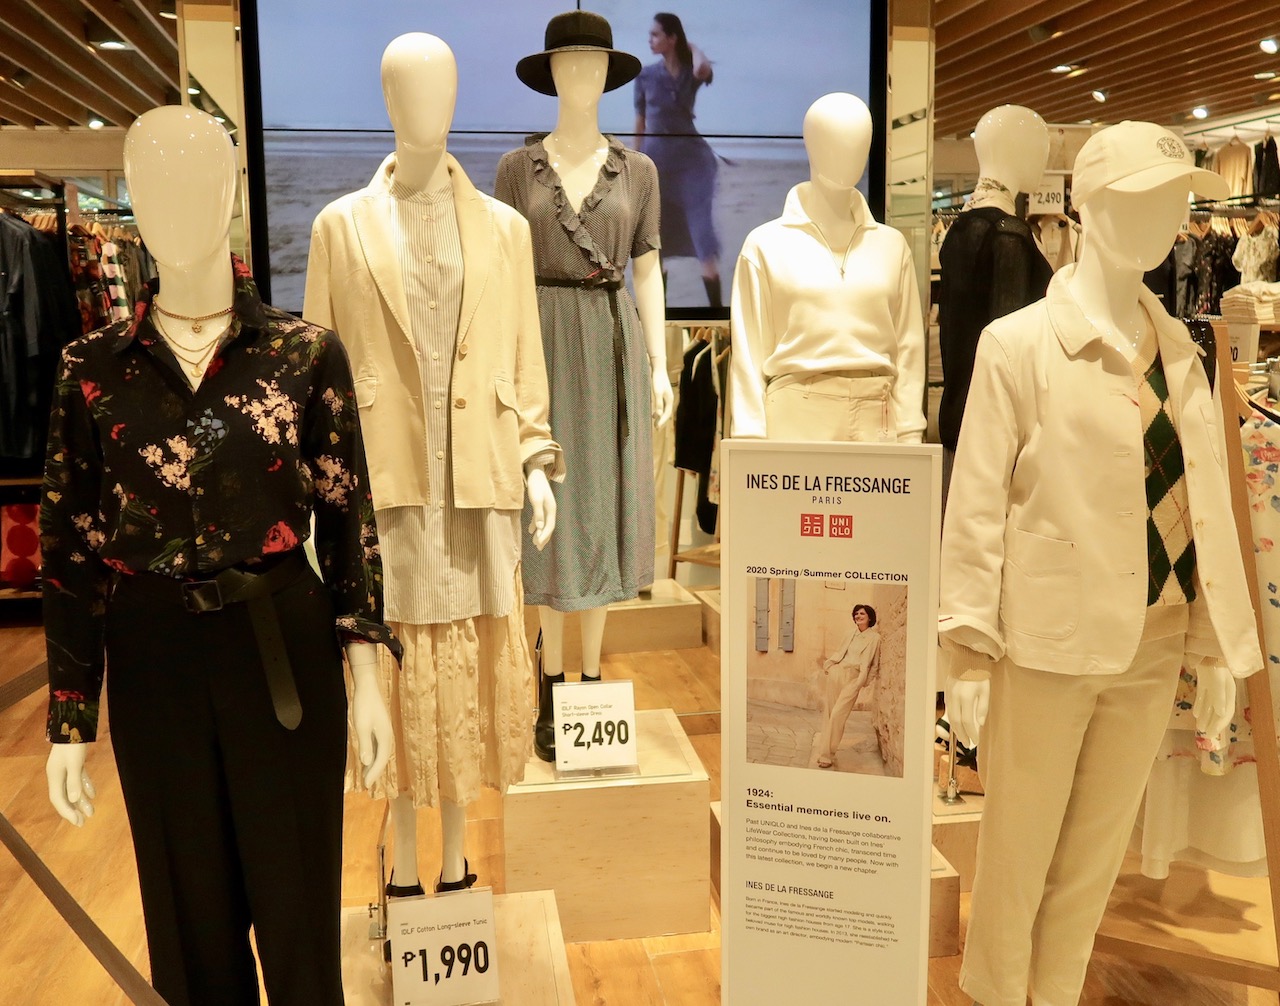 Ines de la Fressange returns with a new Uniqlo readytowear collab for SS18